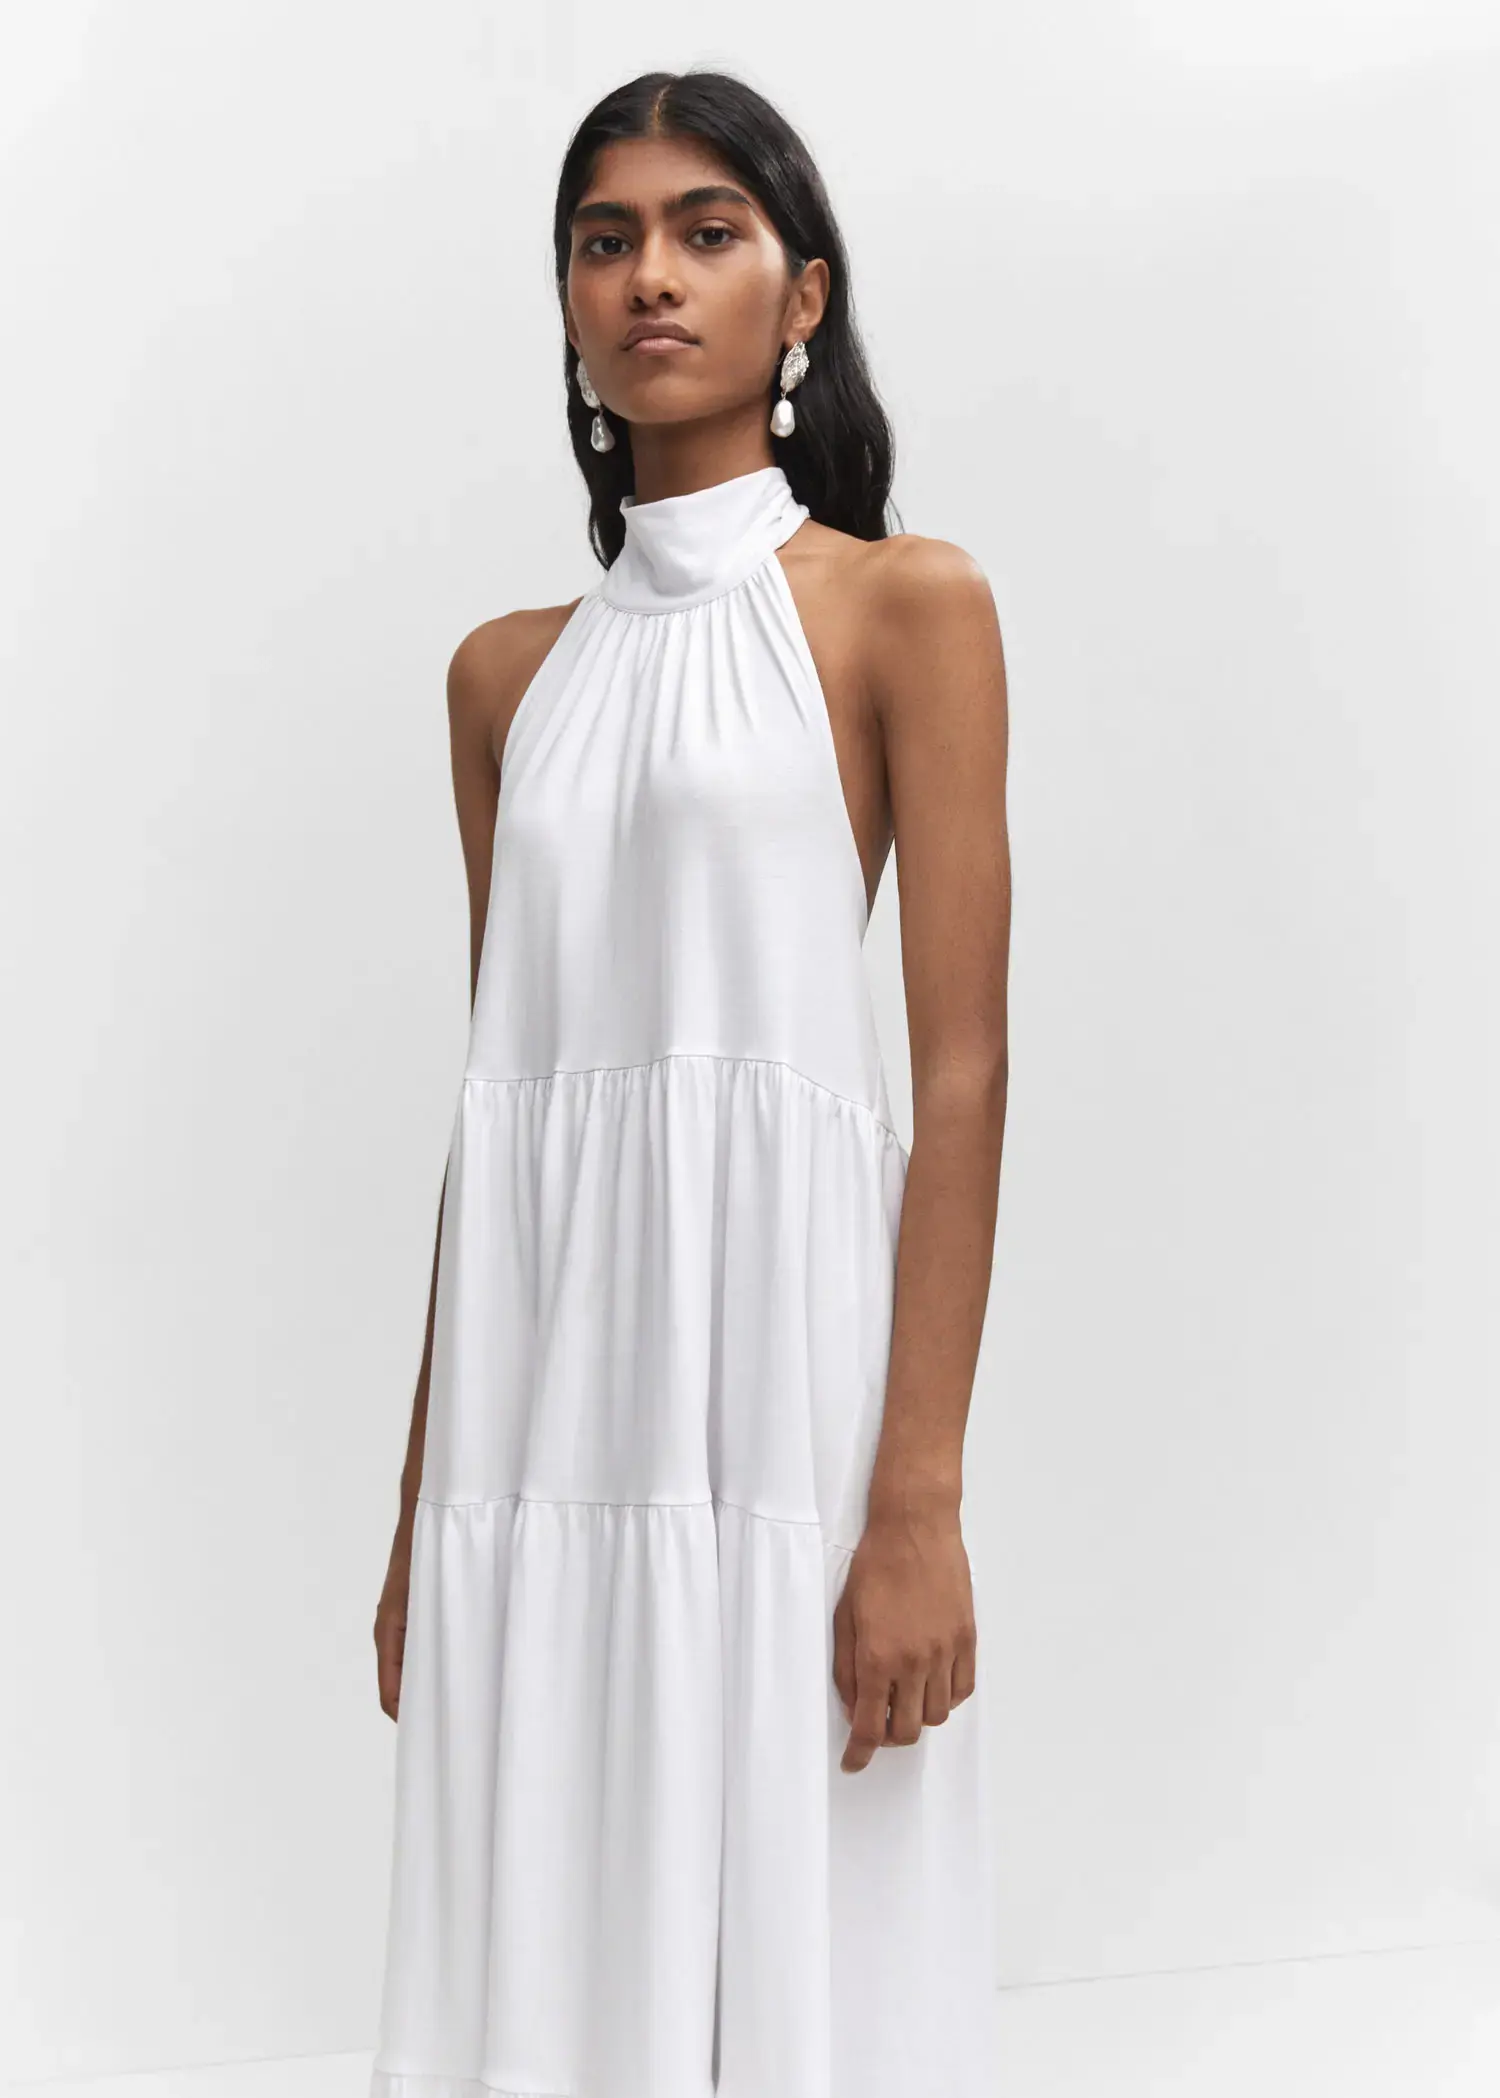 Mango Halter-neck open-back dress. a woman wearing a white dress standing in front of a white wall. 